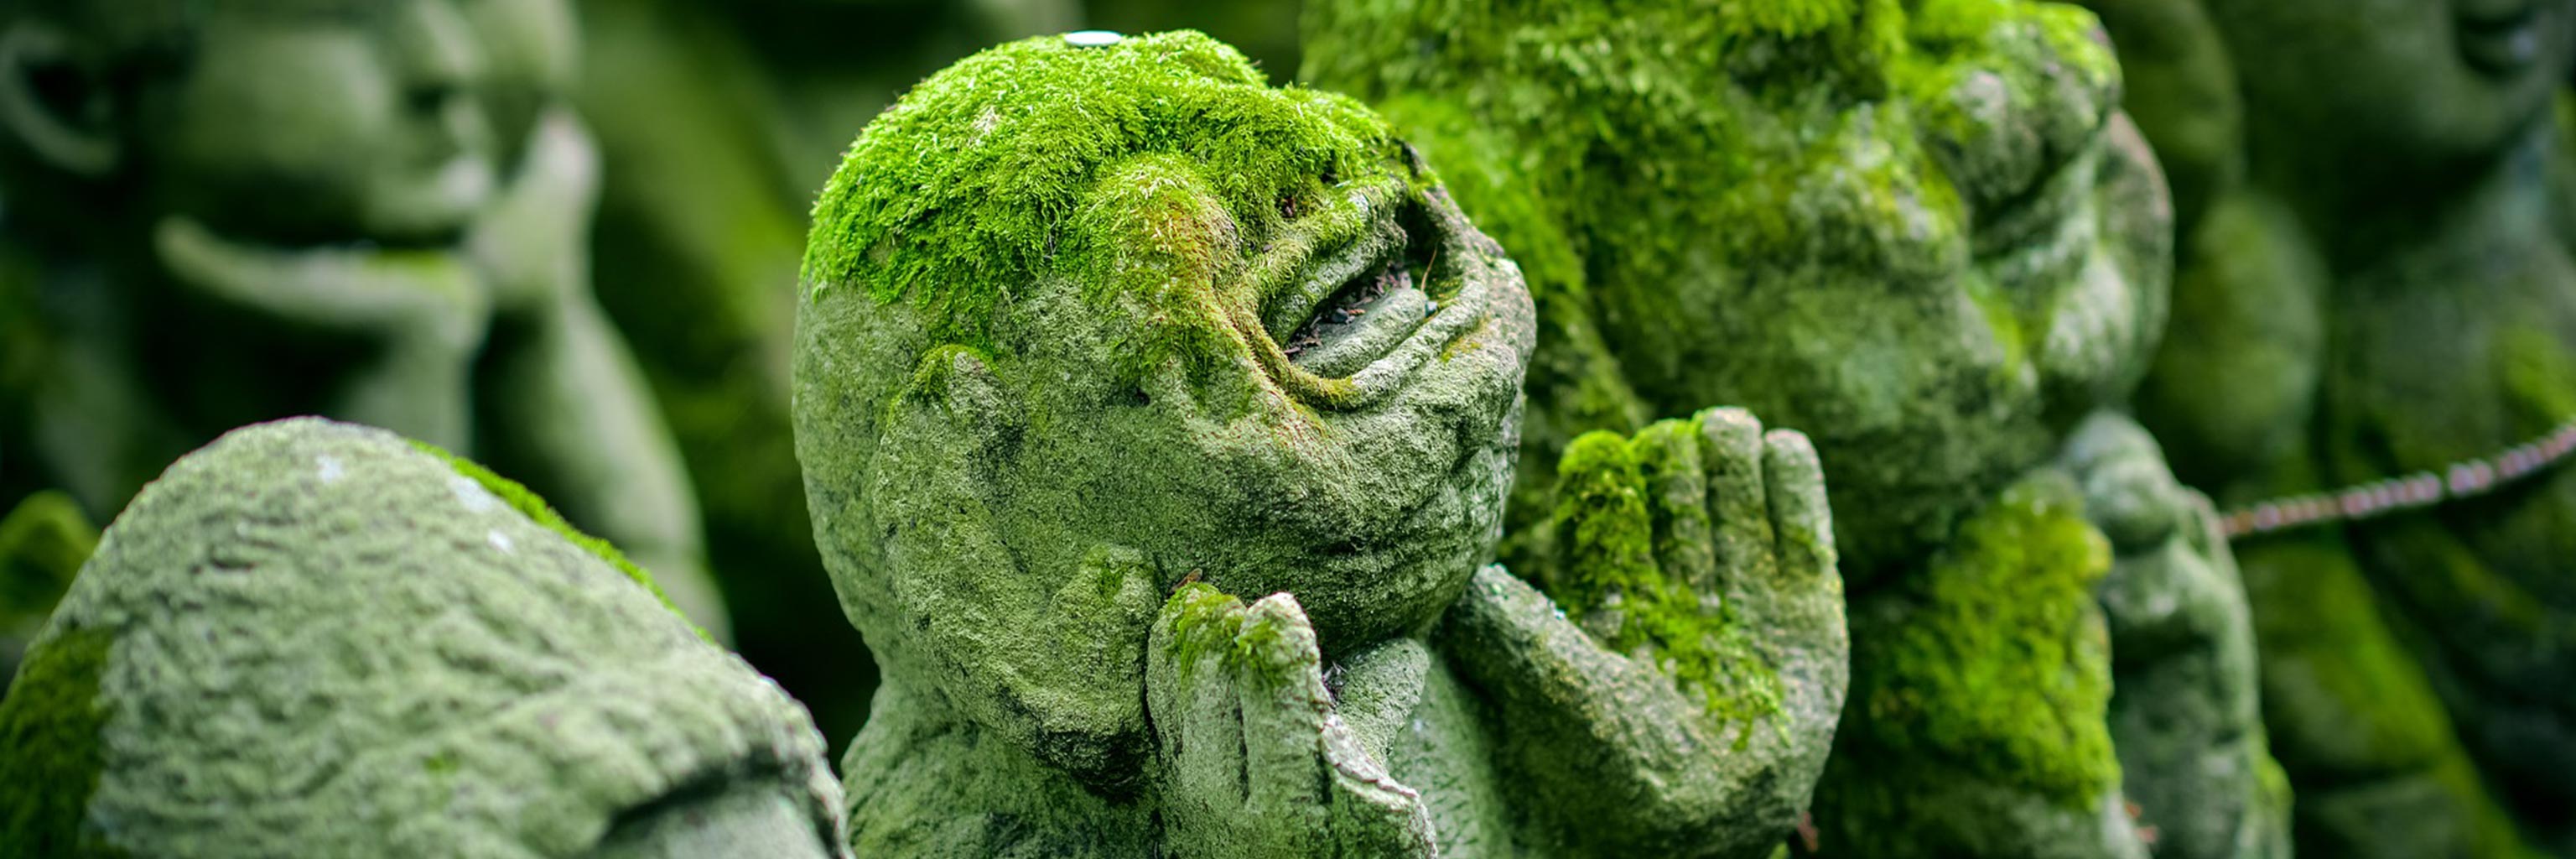 green moss growing on ancient human looking statues